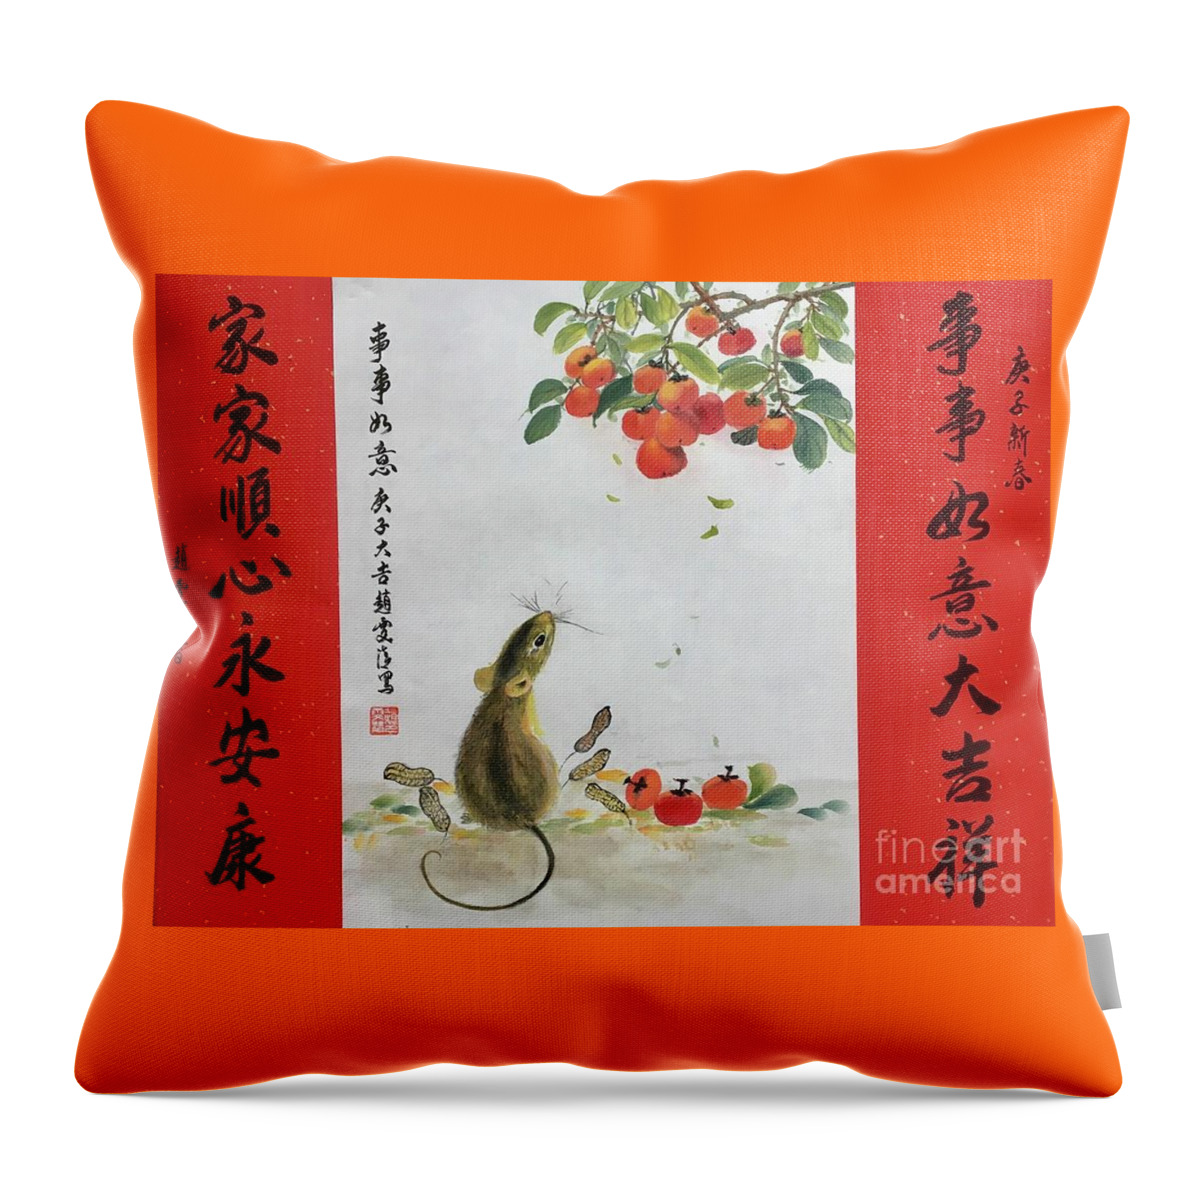 Lunar Year.2020 Throw Pillow featuring the painting Lunar Year Of The Rat With Couplet by Carmen Lam